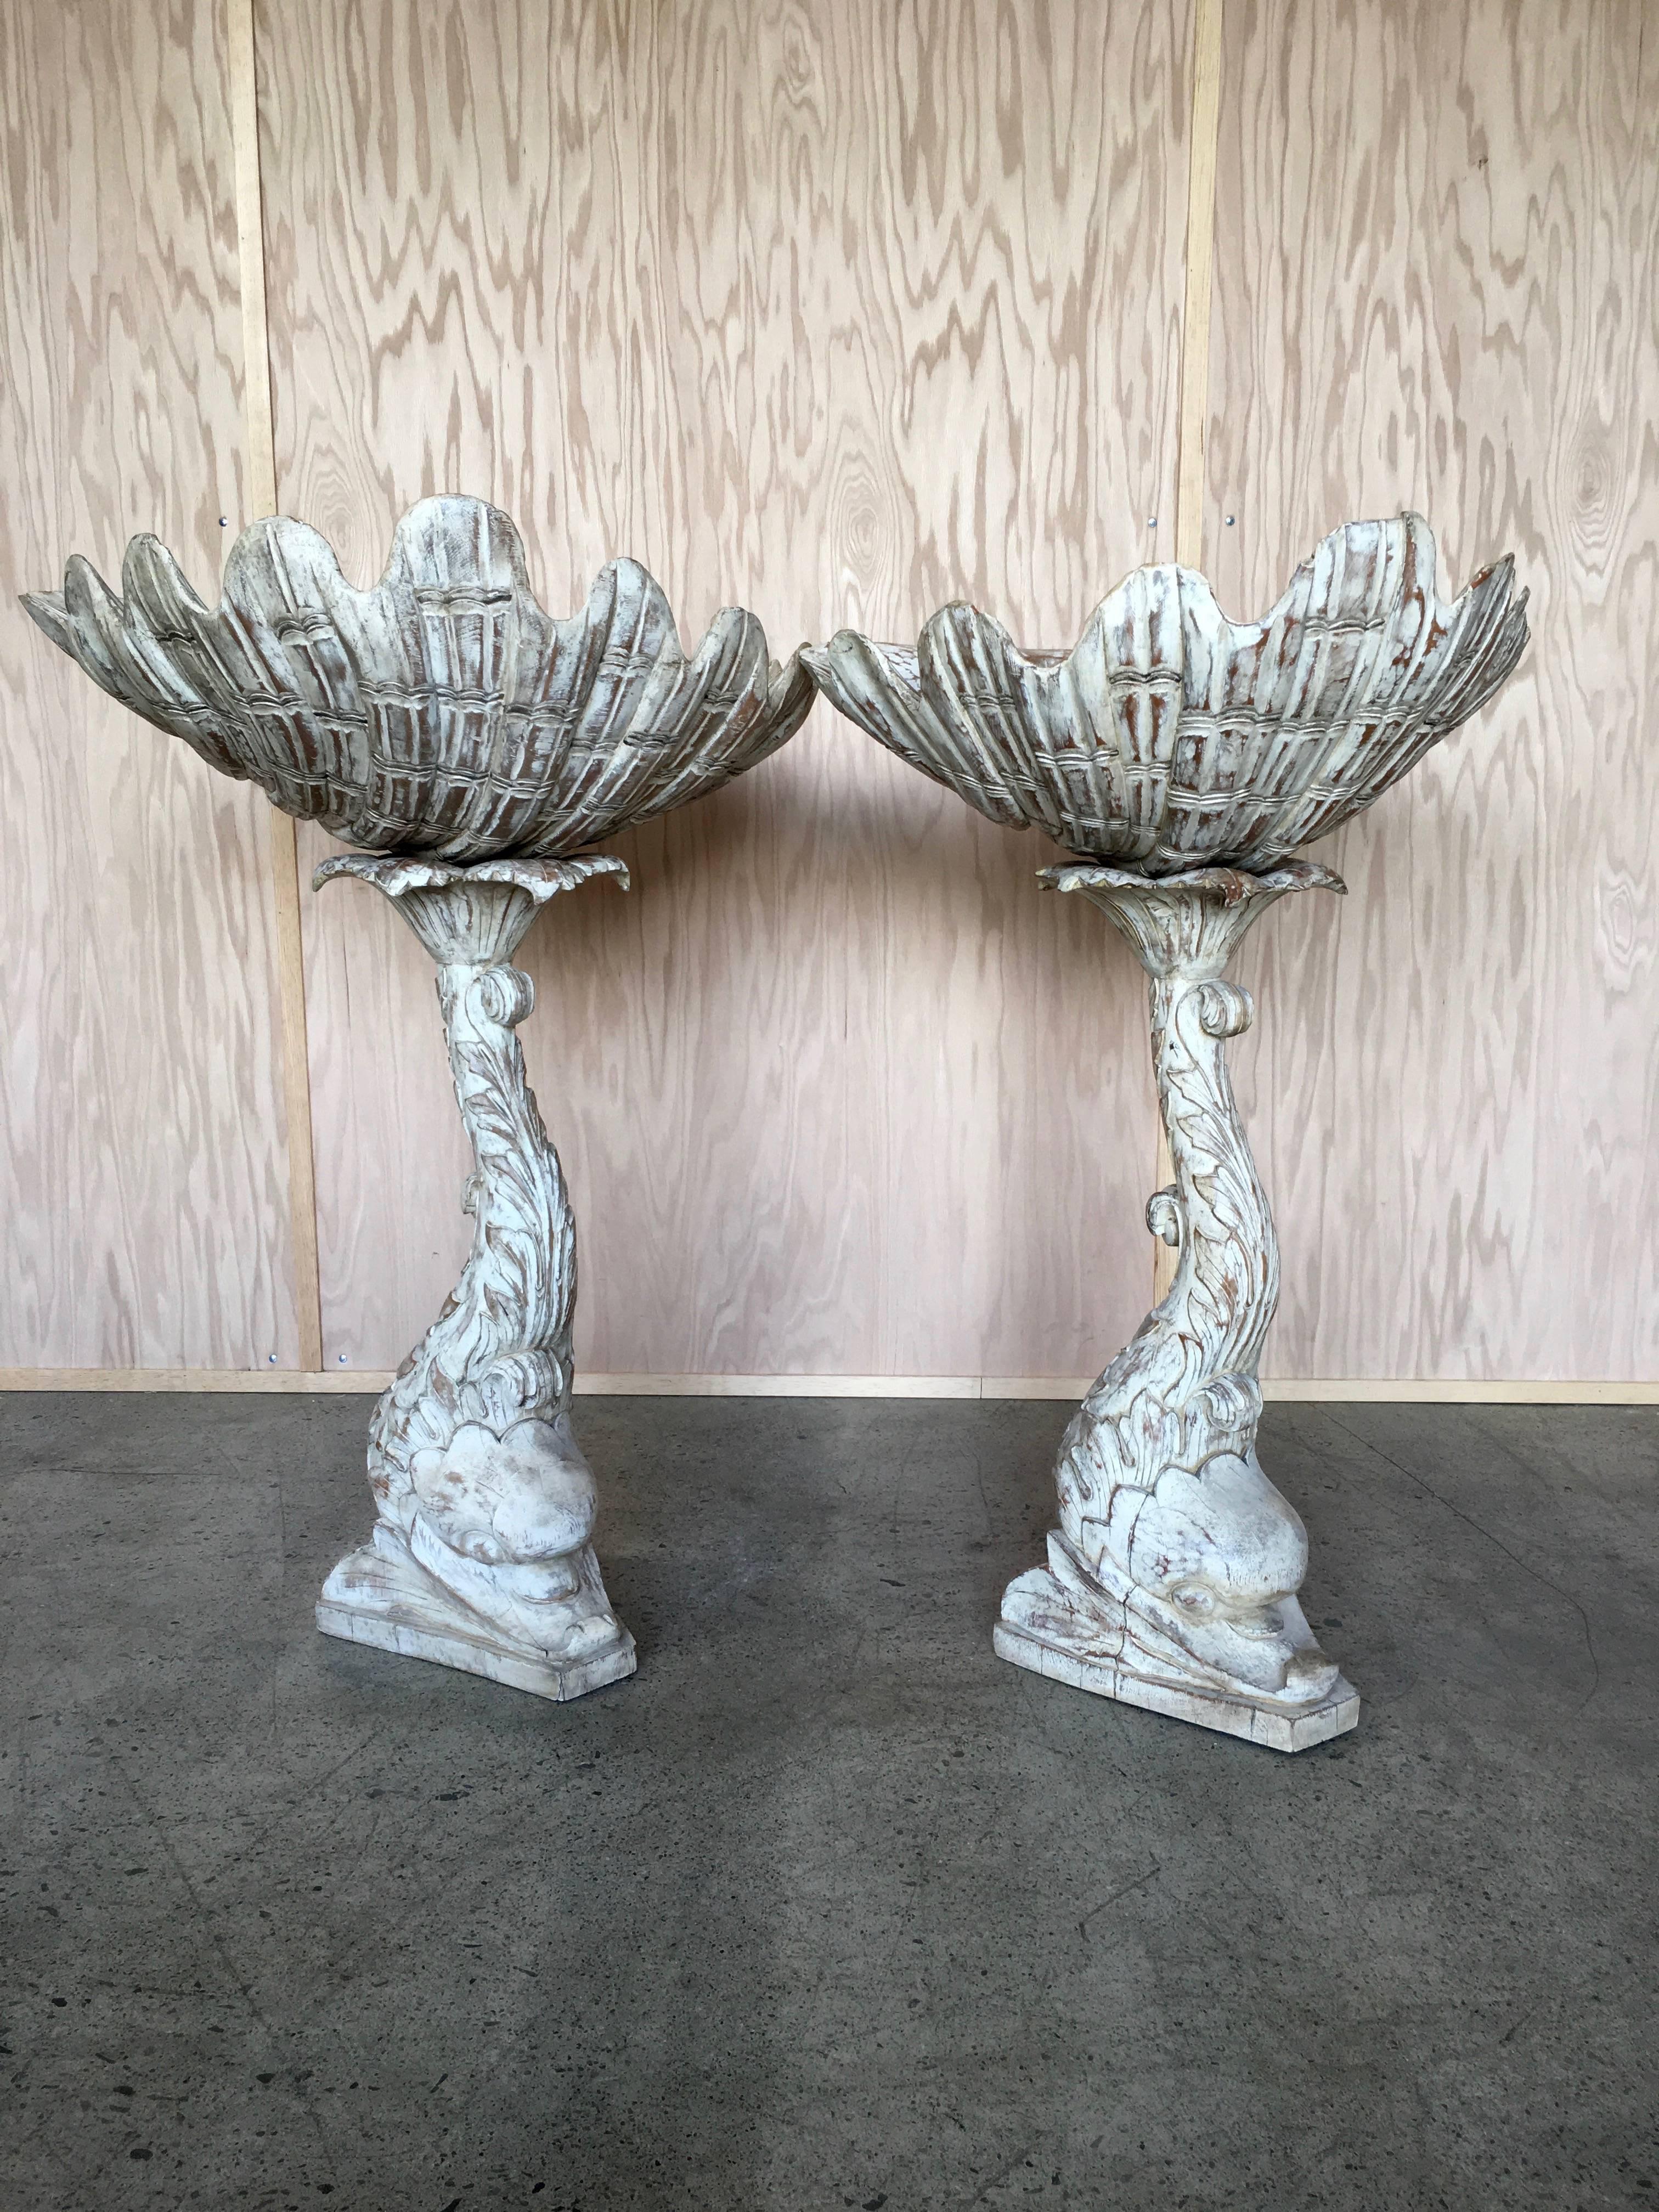 Pair of Grotto Fern stands with shell and Dolphin carving.